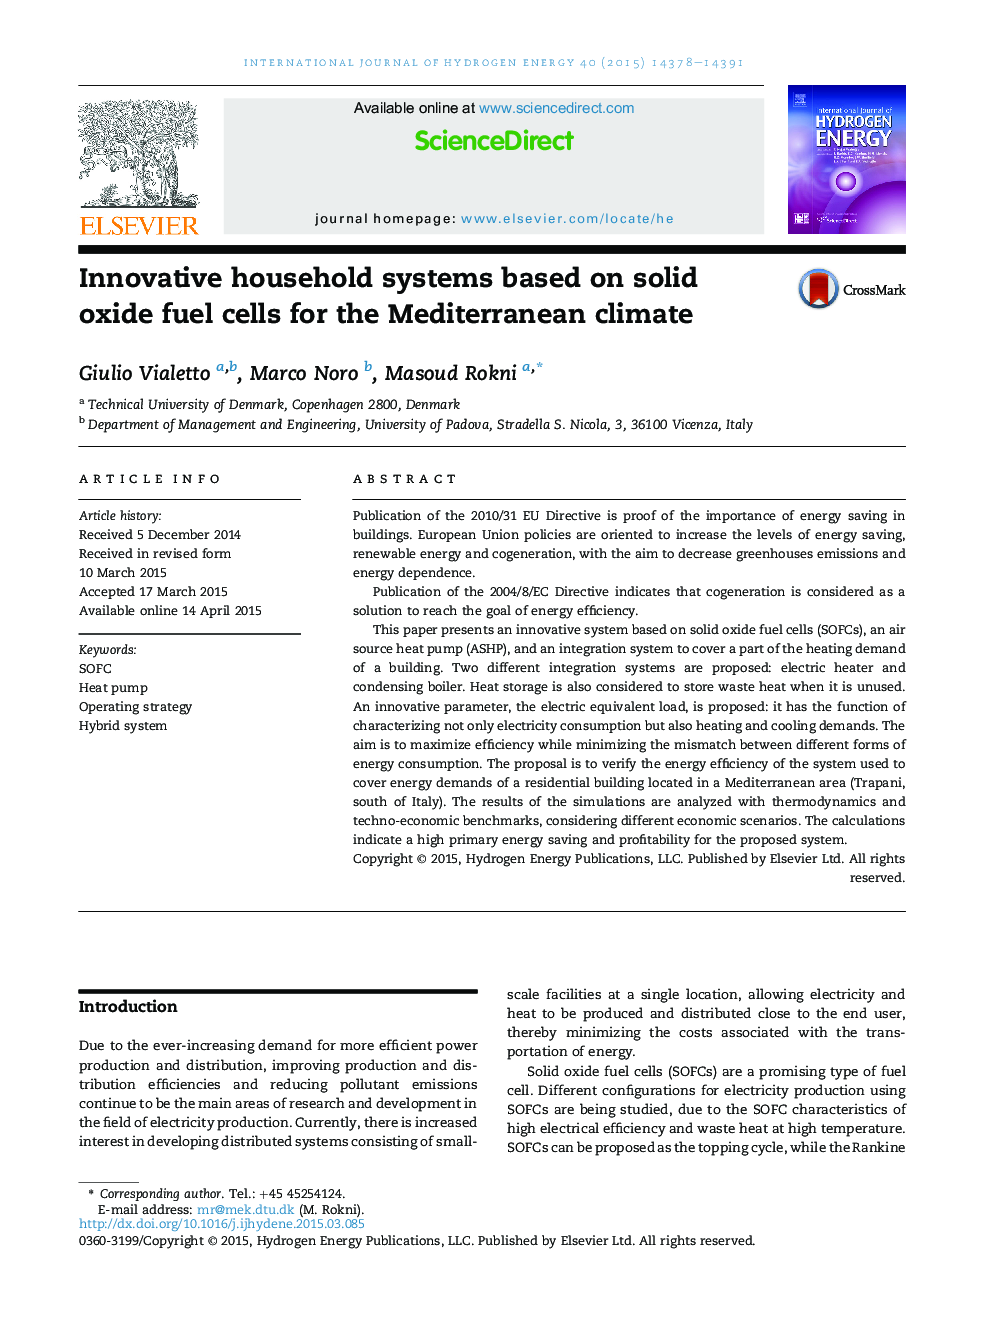 Innovative household systems based on solid oxide fuel cells for the Mediterranean climate